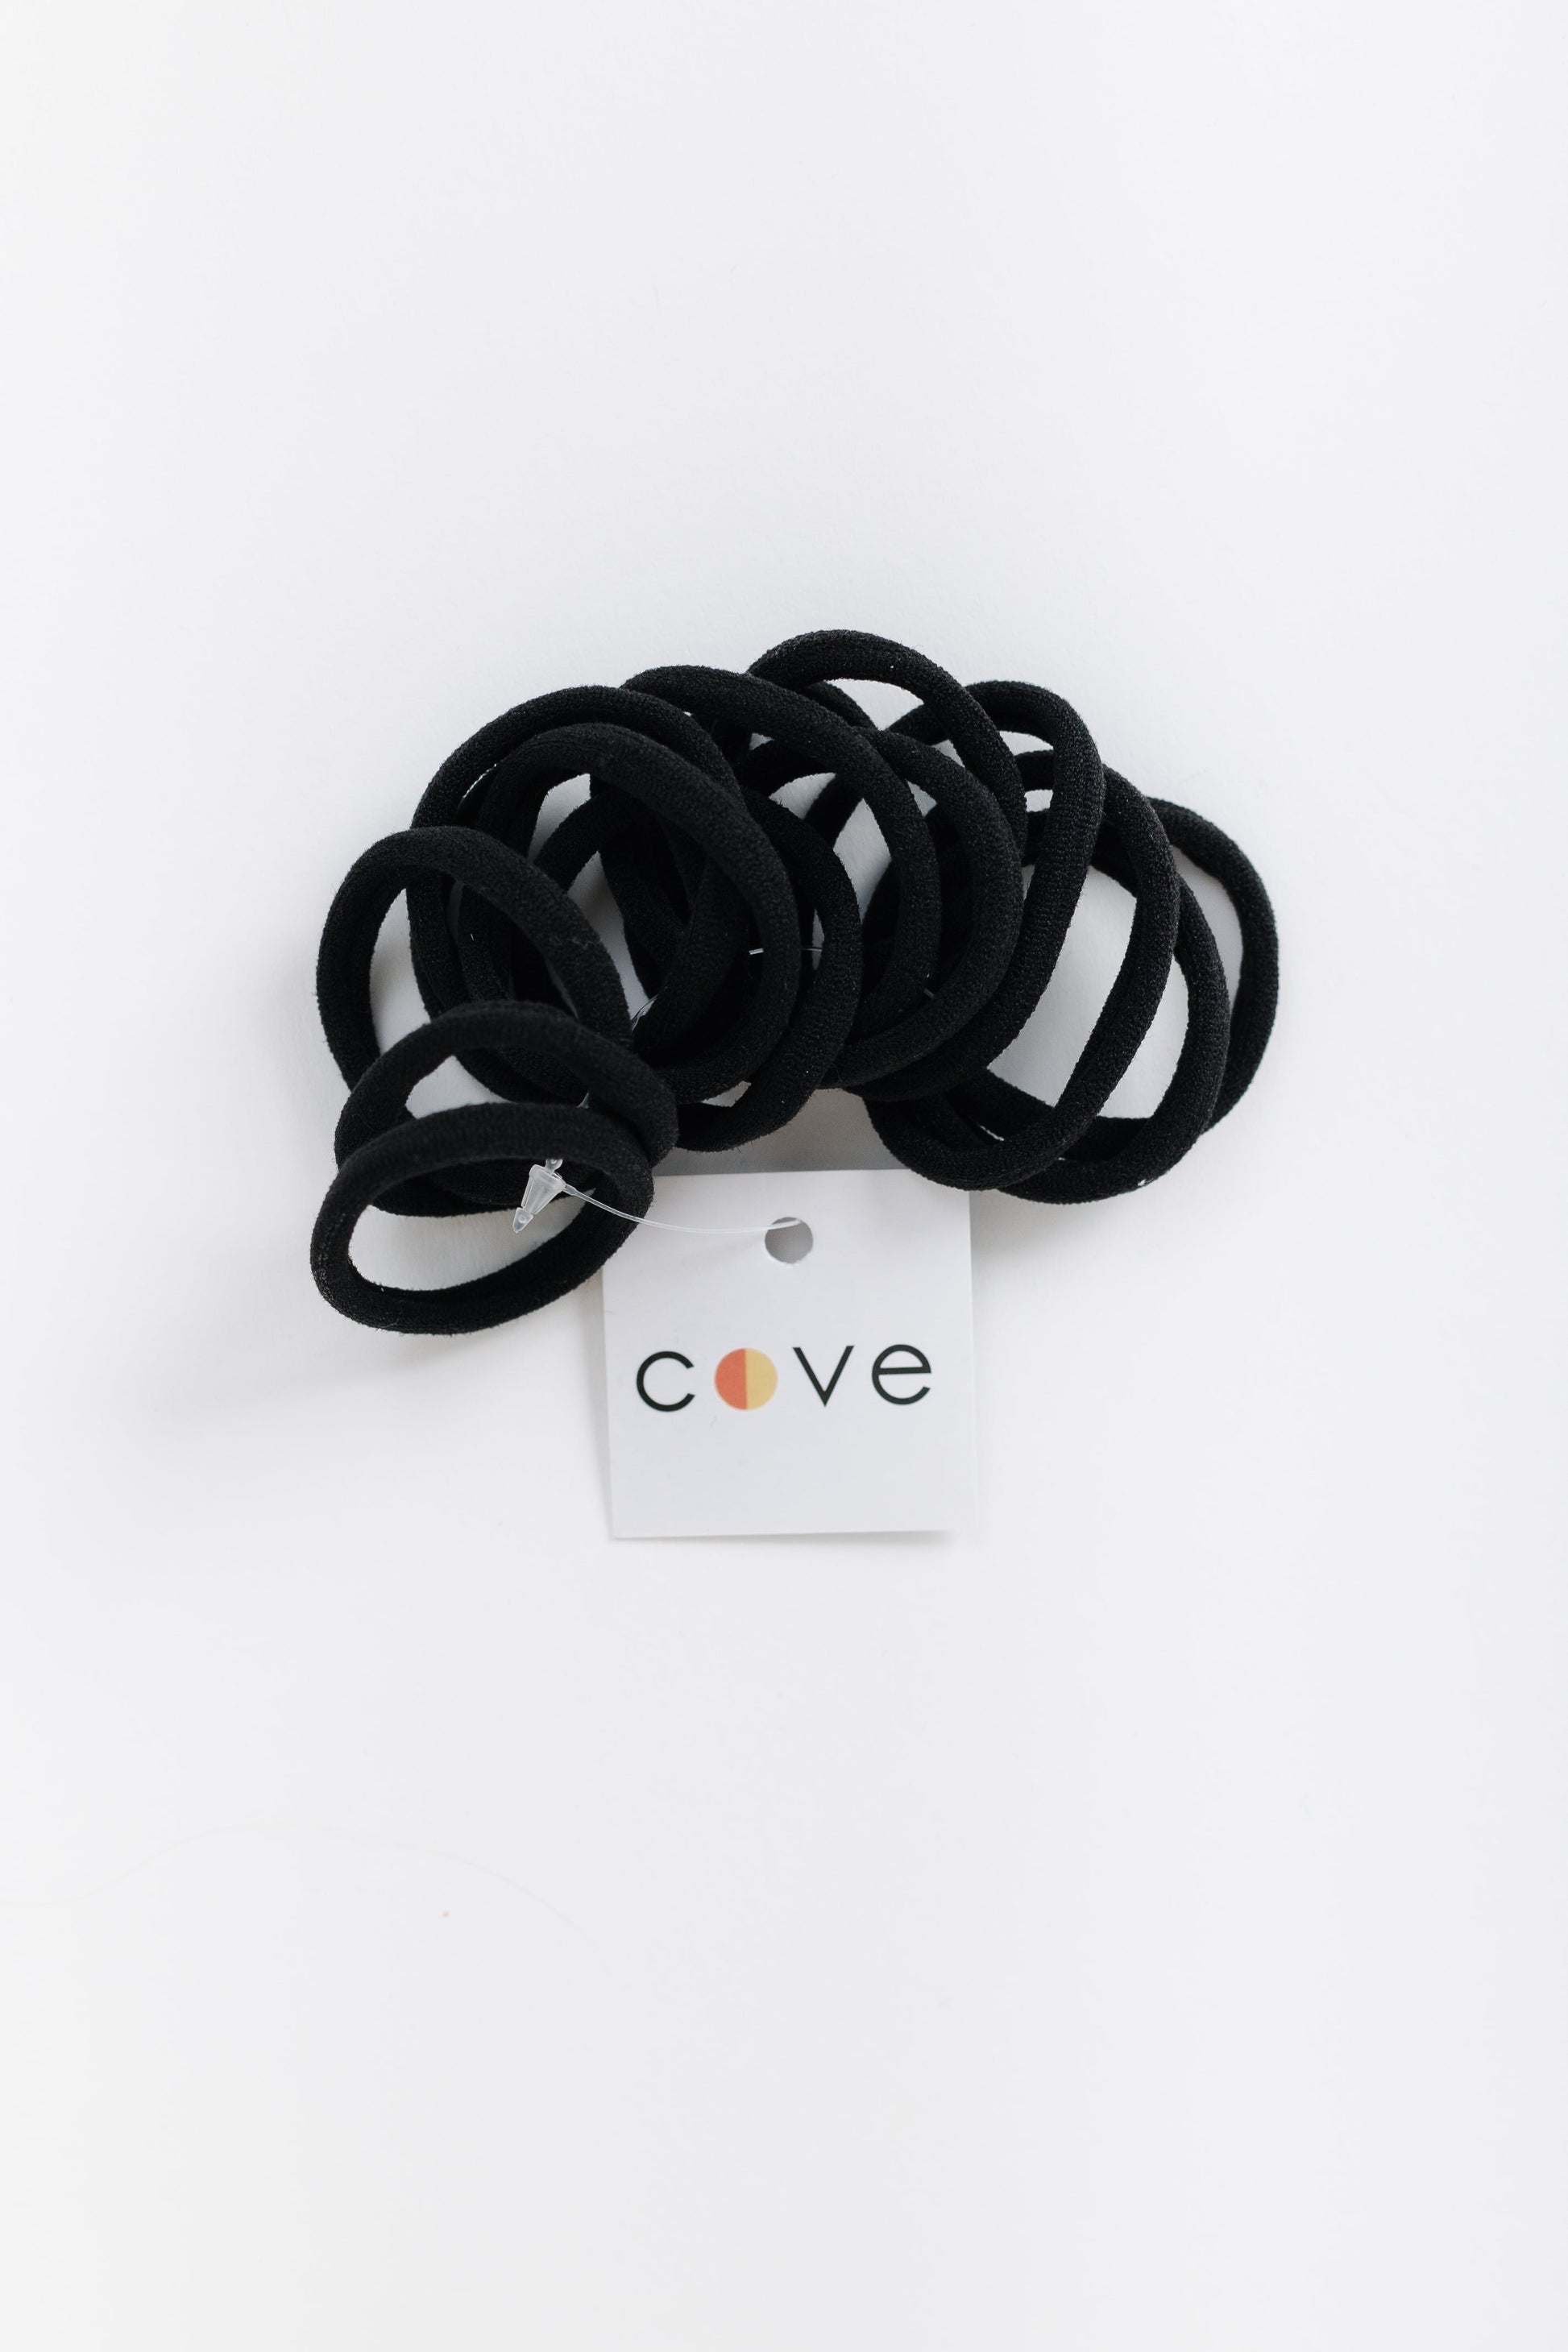 Cove Hair Ties - Set of 10 WOMEN'S HAIR ACCESSORY Cove Accessories 